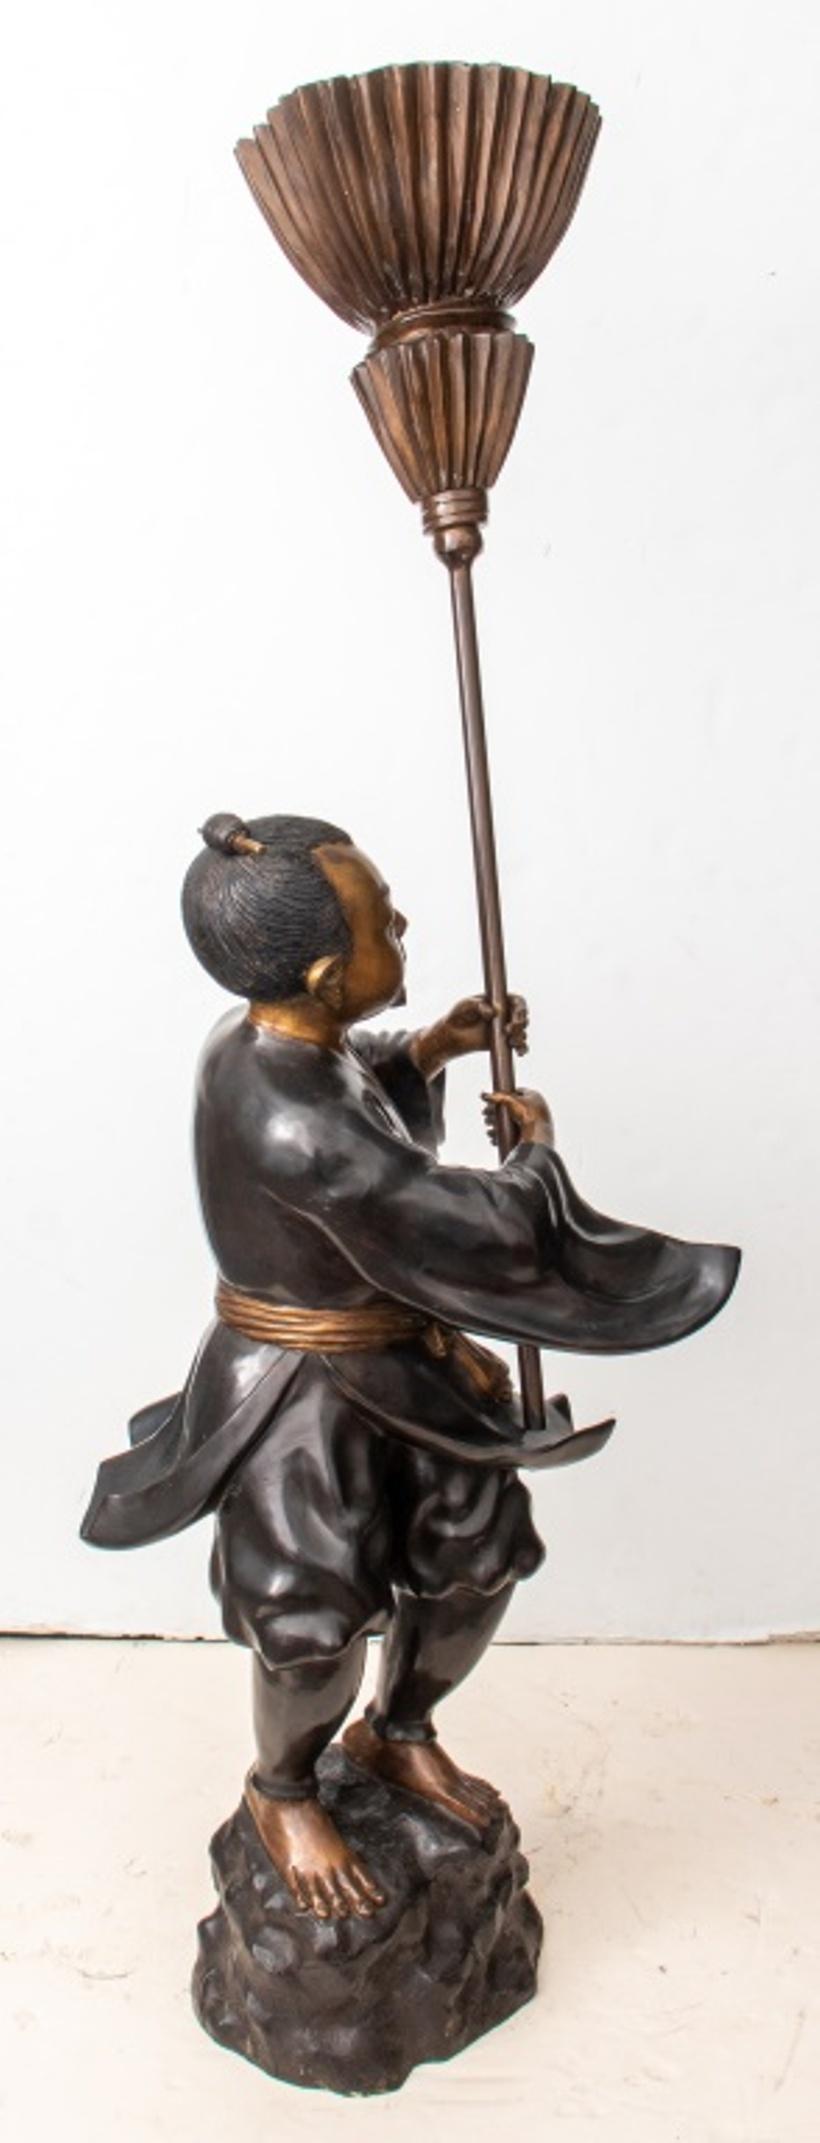 Japanese large bronze sculpture in two parts depicting an attendant standing atop a rocky base and holding a chamara fly-whisk or -swish used to sweep ignorance and fan deities, the figure's face, hands, and bare feet in gilt bronze, circa early